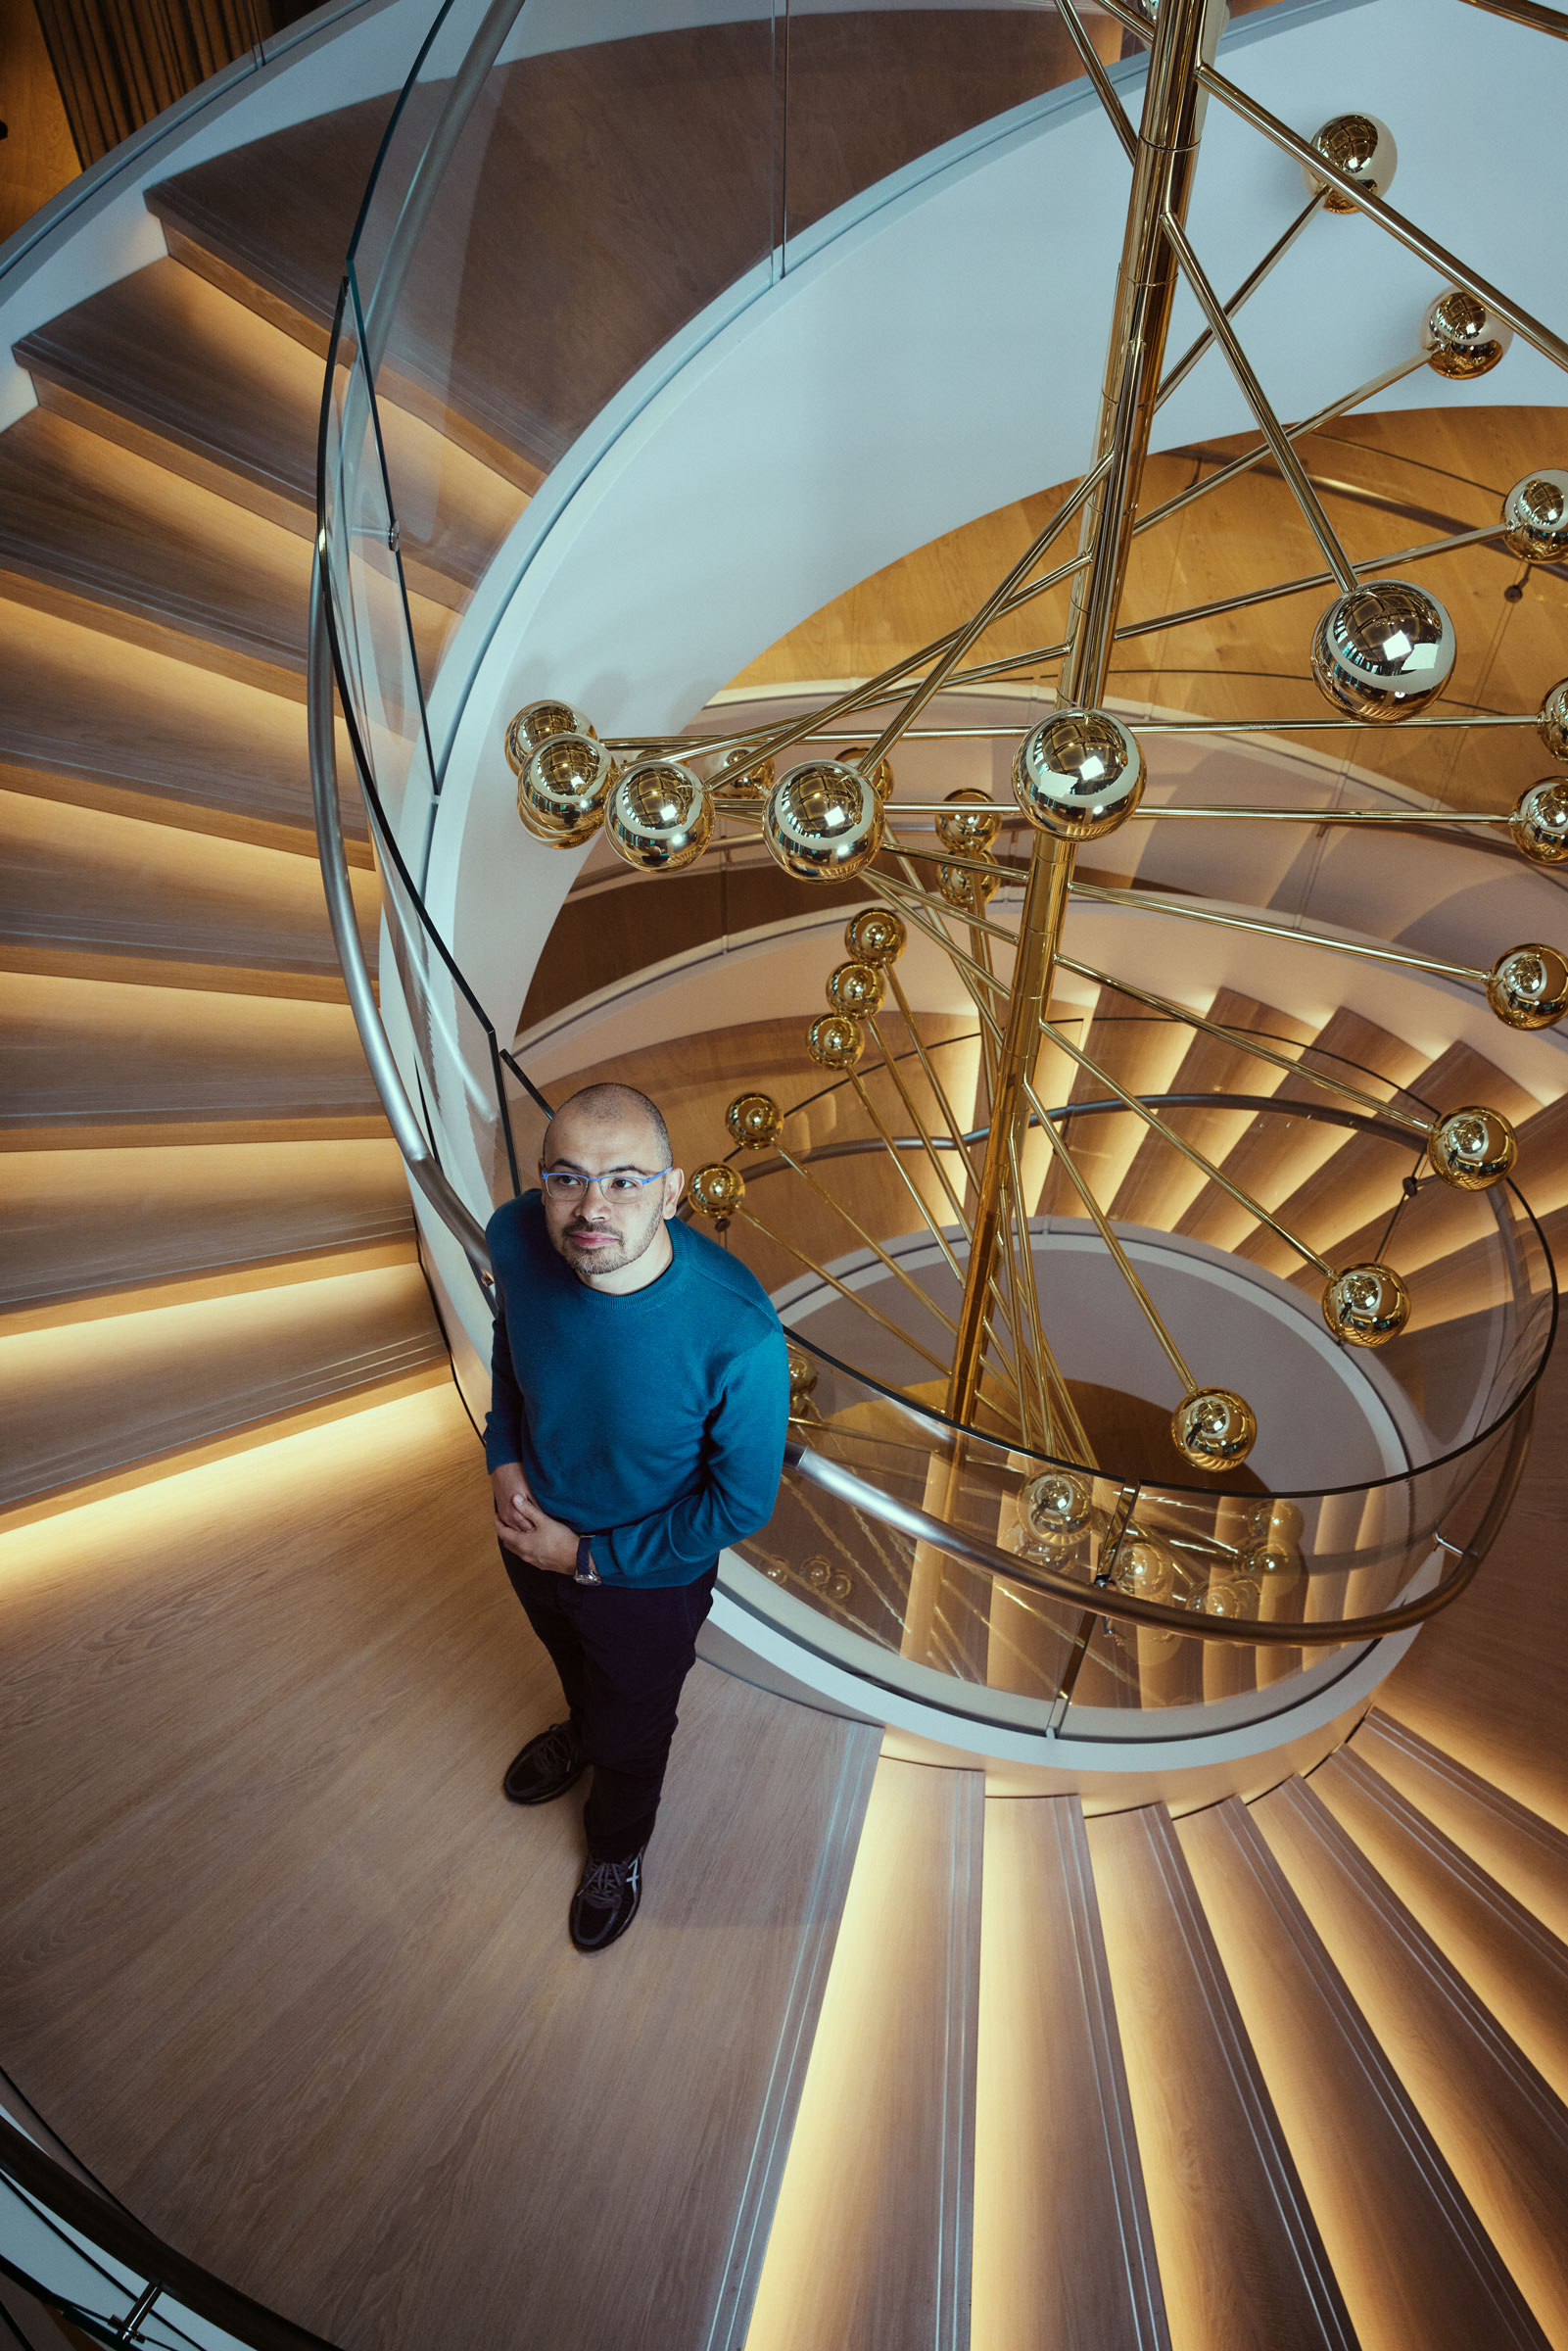 Demis Hassabis by the Helicase—a sculpture that uses DNA’s helix shape as a symbol of human endeavor and the pursuit of knowledge—at DeepMind’s headquarters in London on Nov. 3, 2022